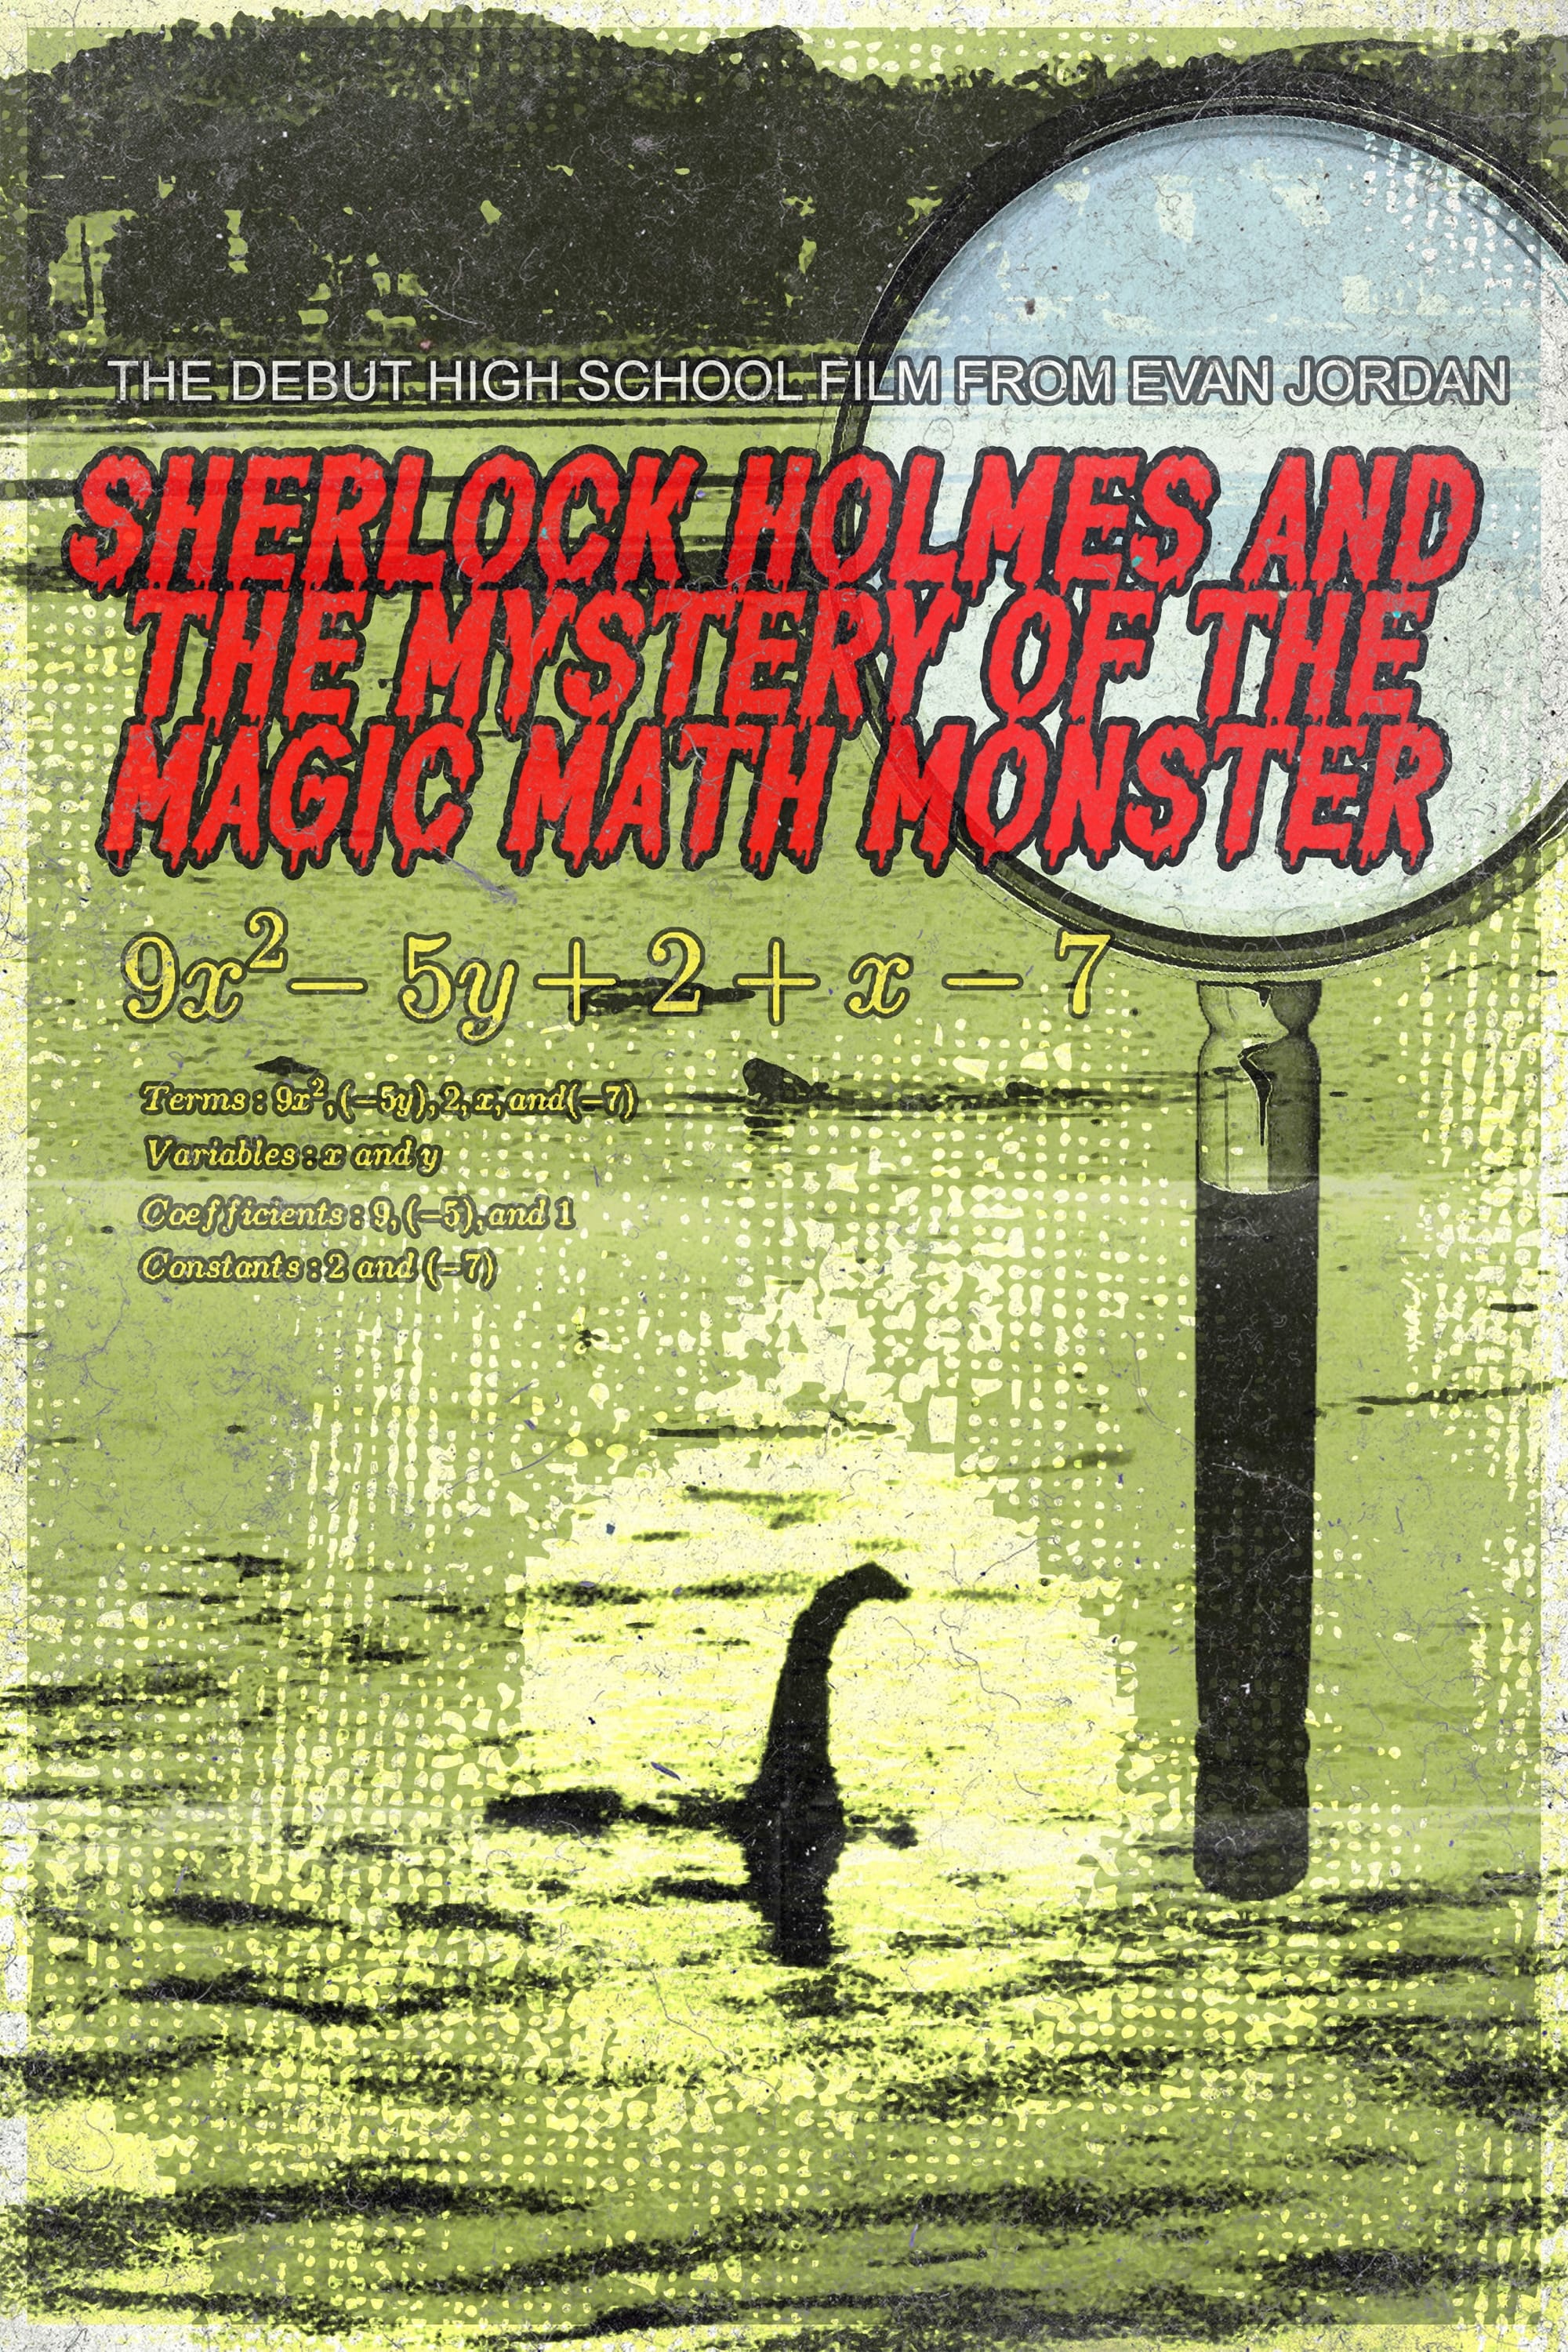 Sherlock Holmes and The Mystery of The Magic Math Monster